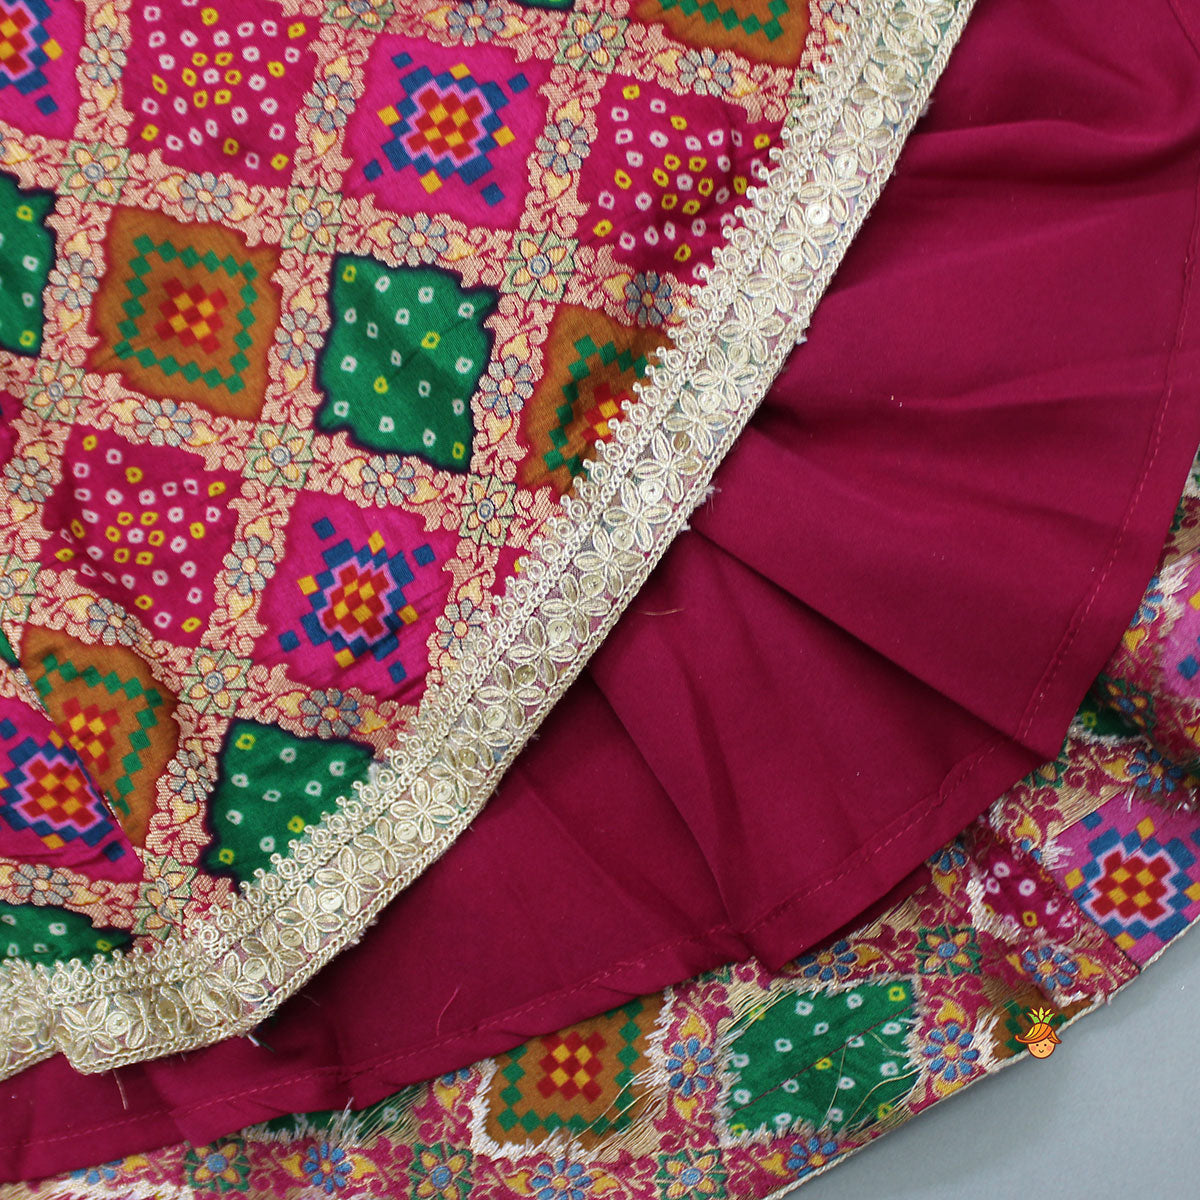 Round Neck Embroidered Pink Top And Bandhani Printed Multicolour Lehenga With Matching Dupatta